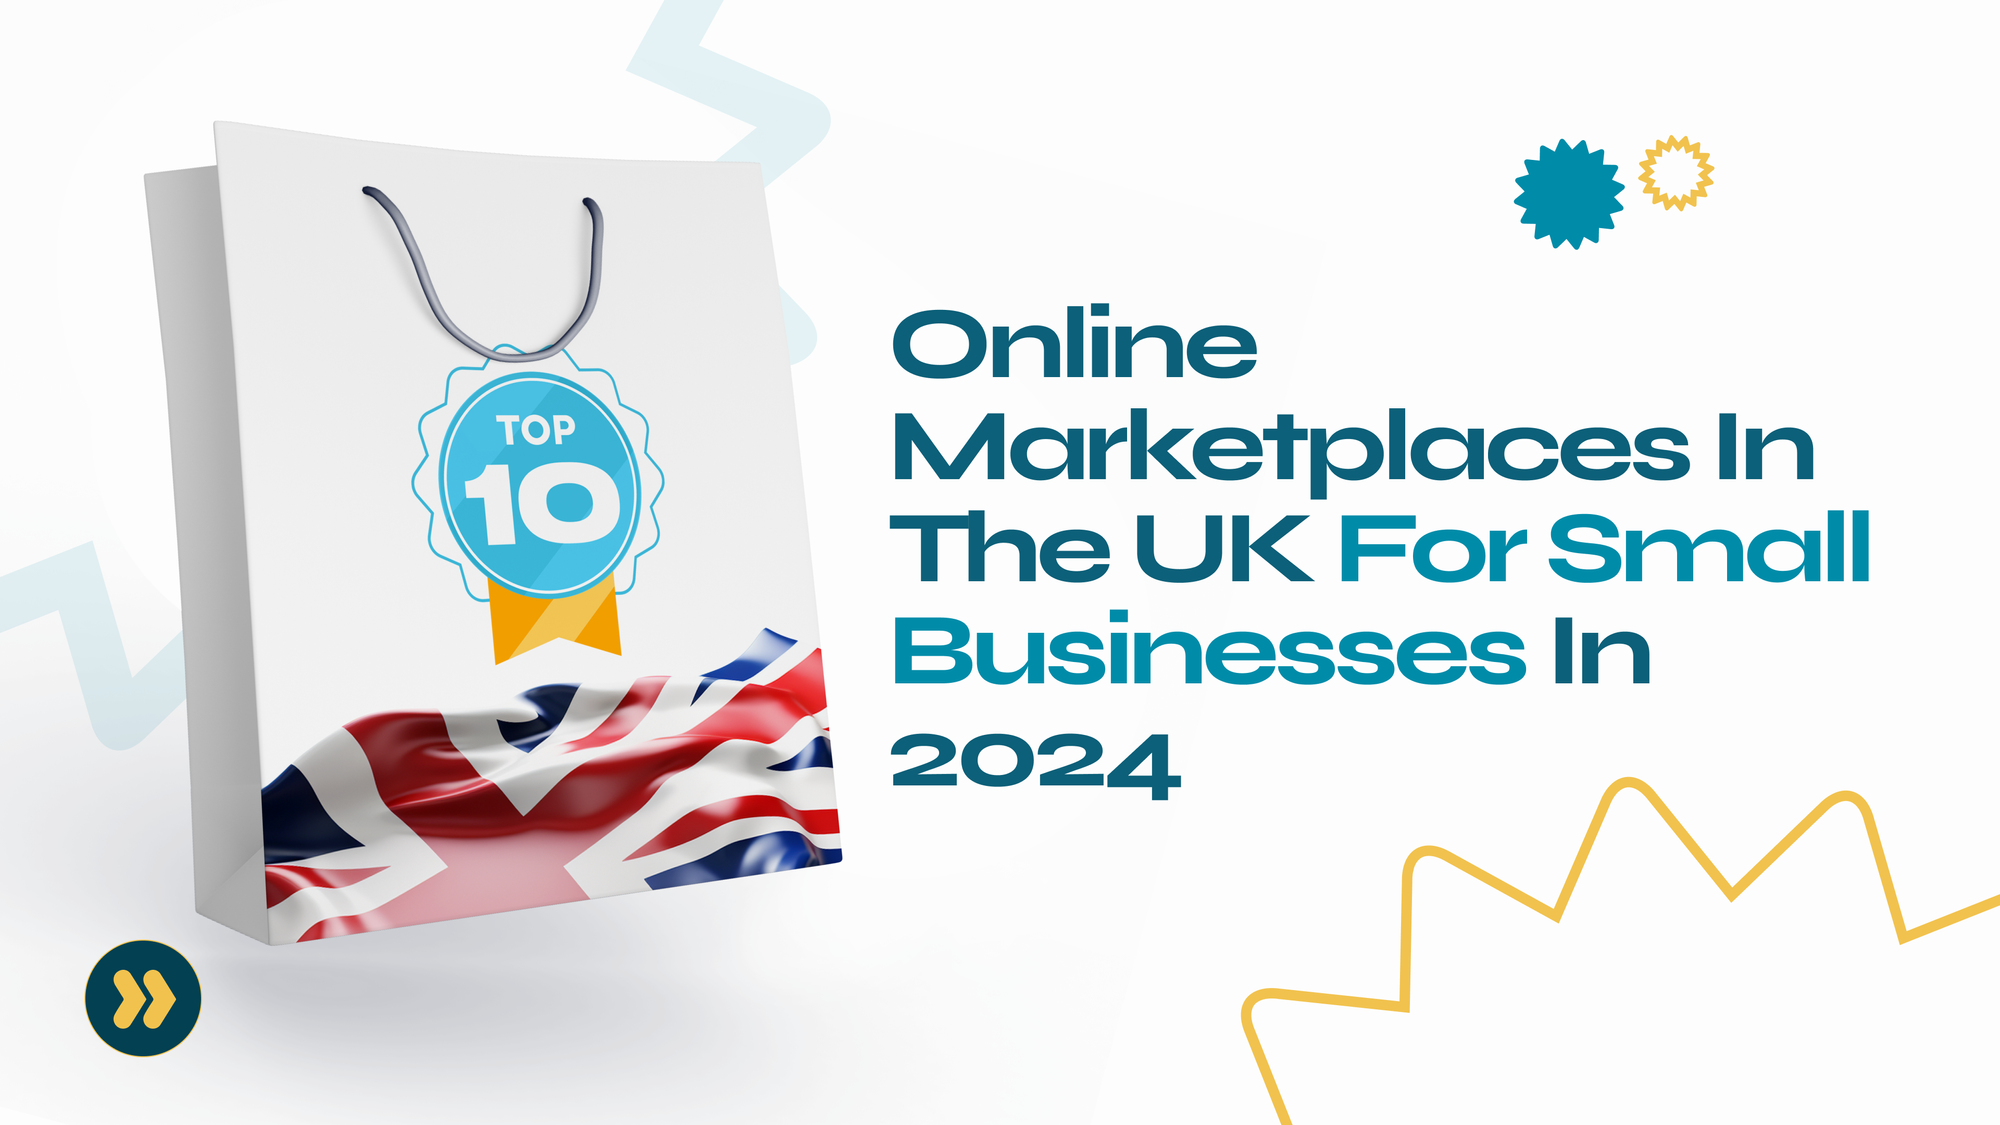 Top 10 Online Marketplaces in the UK for Small Businesses in 2024